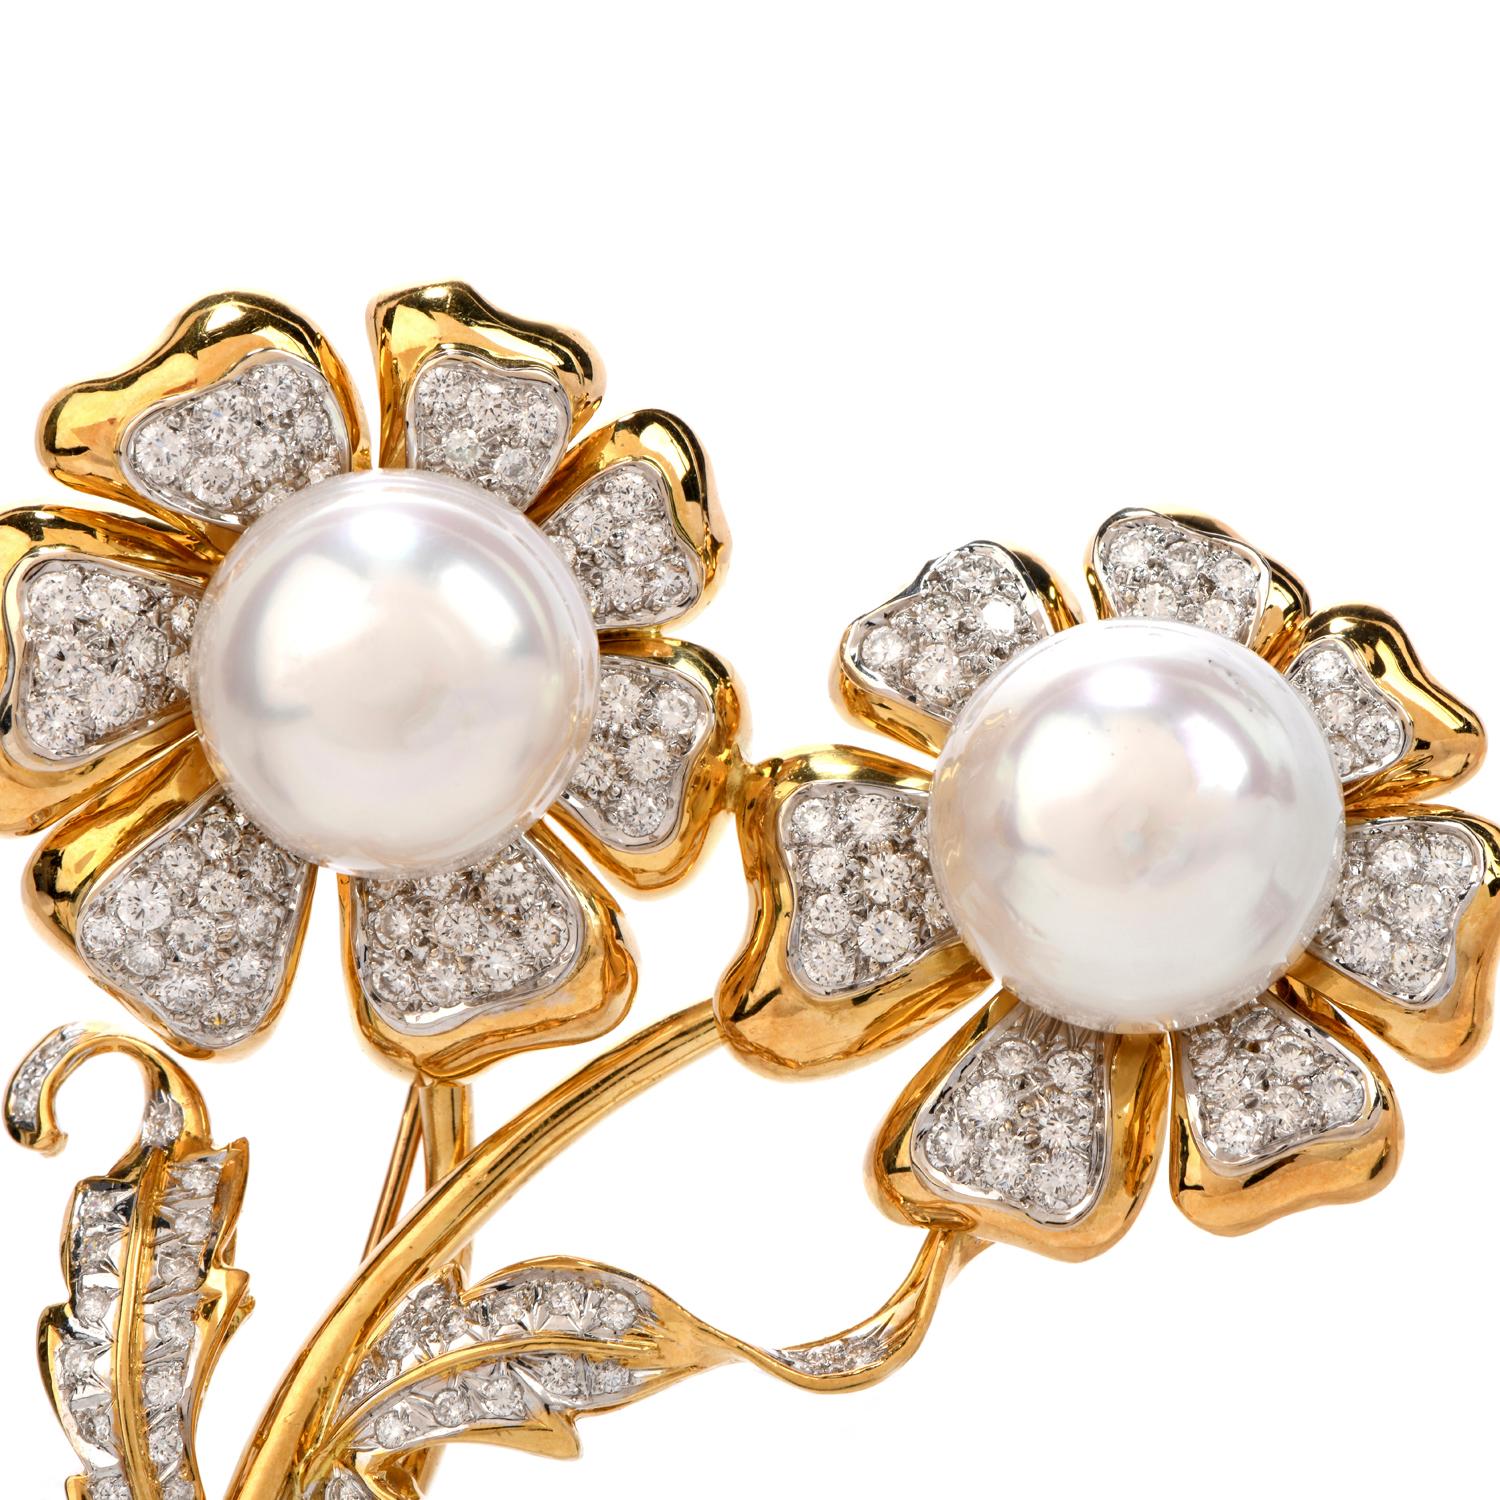 Adore this prominent and beautiful Estate Diamond Pearl 18K Gold Double Flower Pin Brooch!  This pin/brooch is crafted in 18 karat yellow and white gold.  There are two large, 16 millimeter genuine pearls with minor blemishes, that represent the